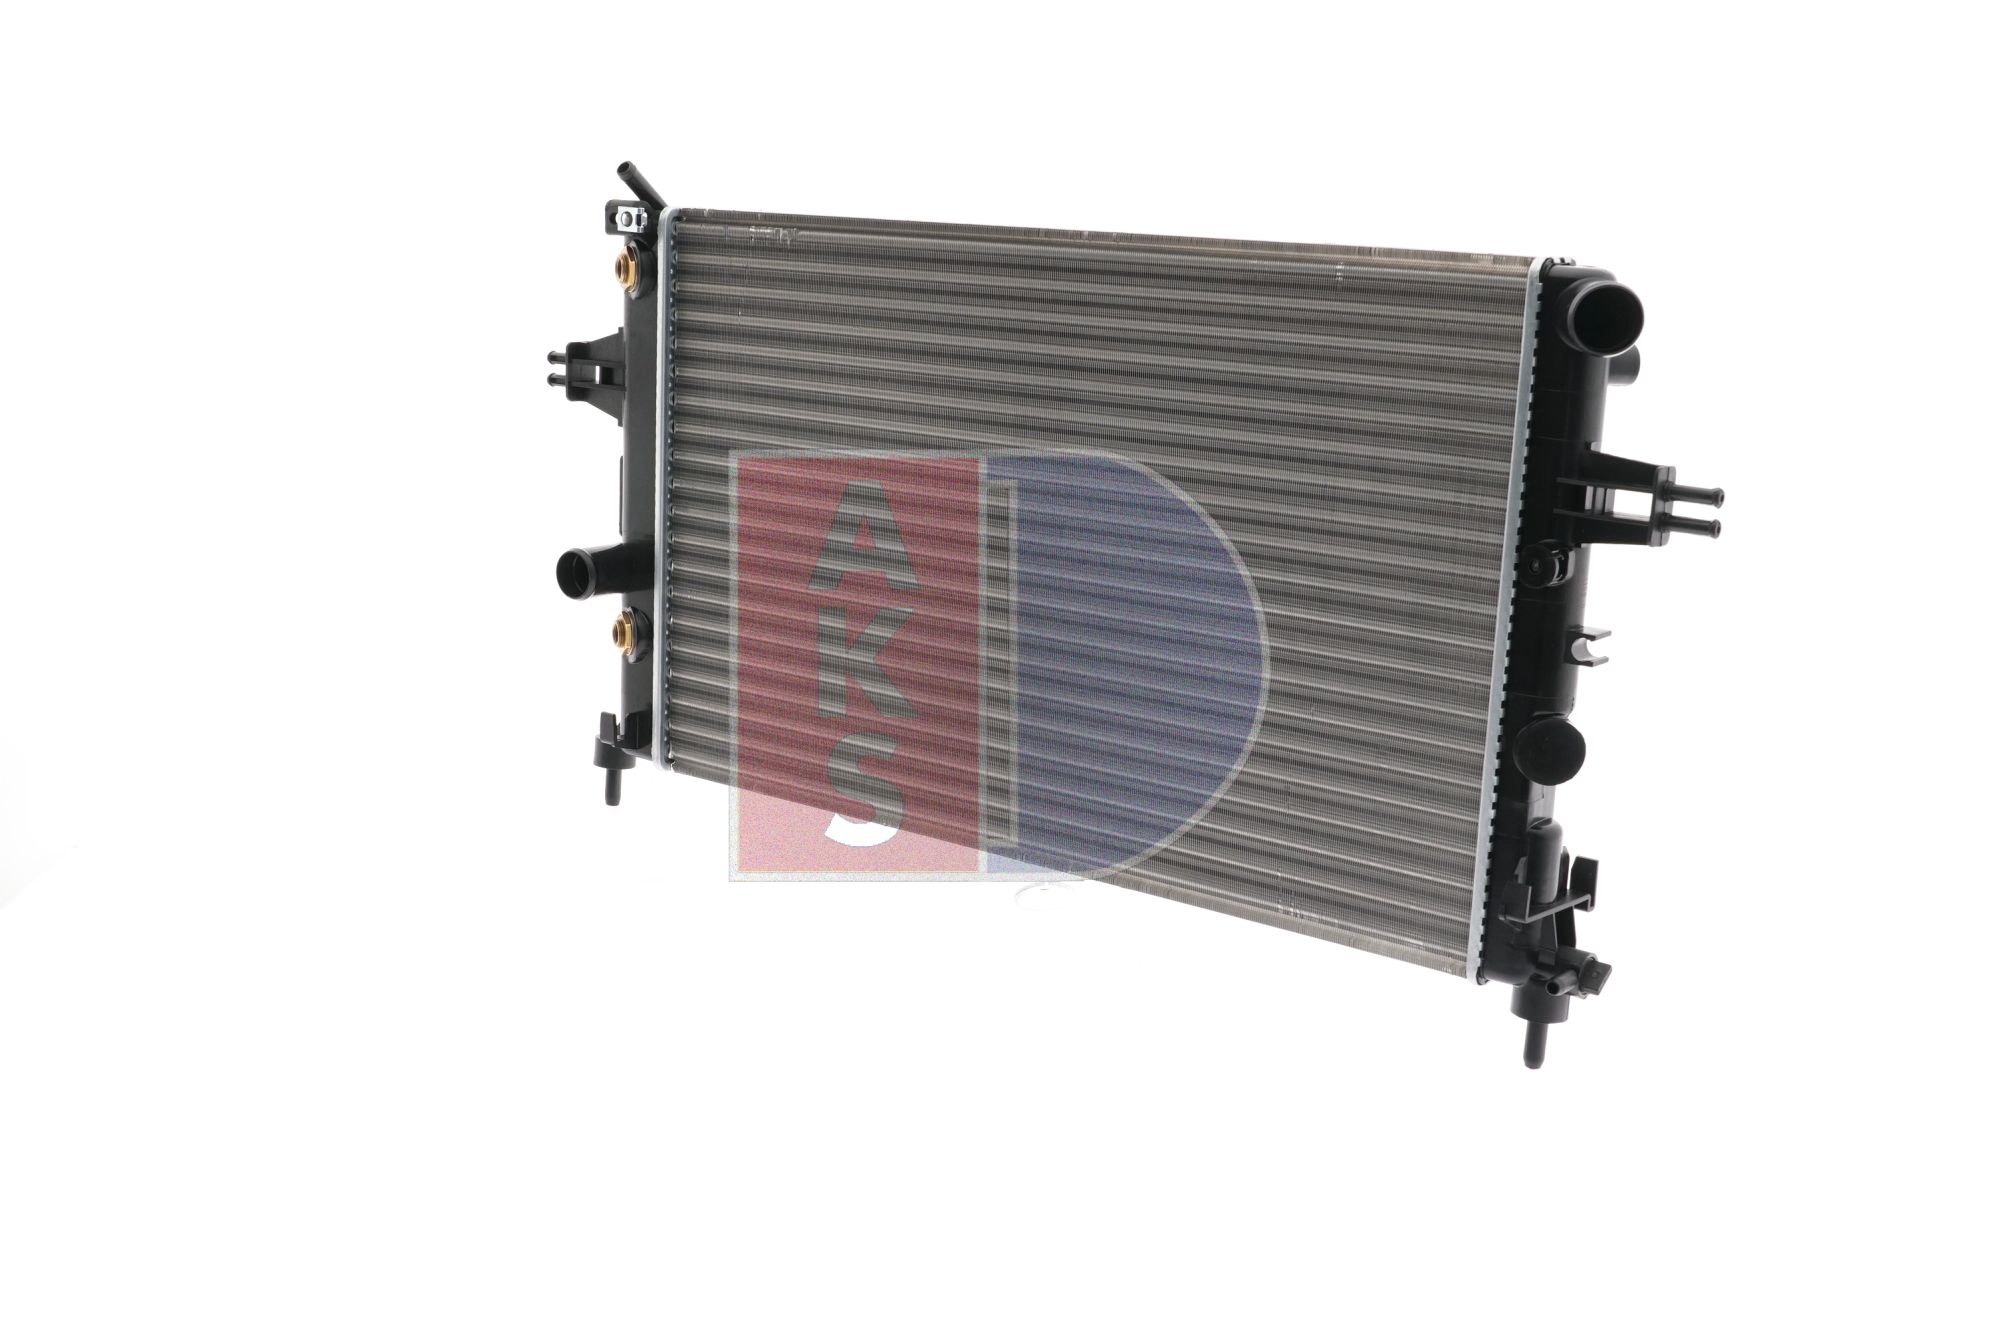 AKS DASIS 151640N Engine radiator 600 x 358 x 26 mm, Automatic Transmission, Mechanically jointed cooling fins